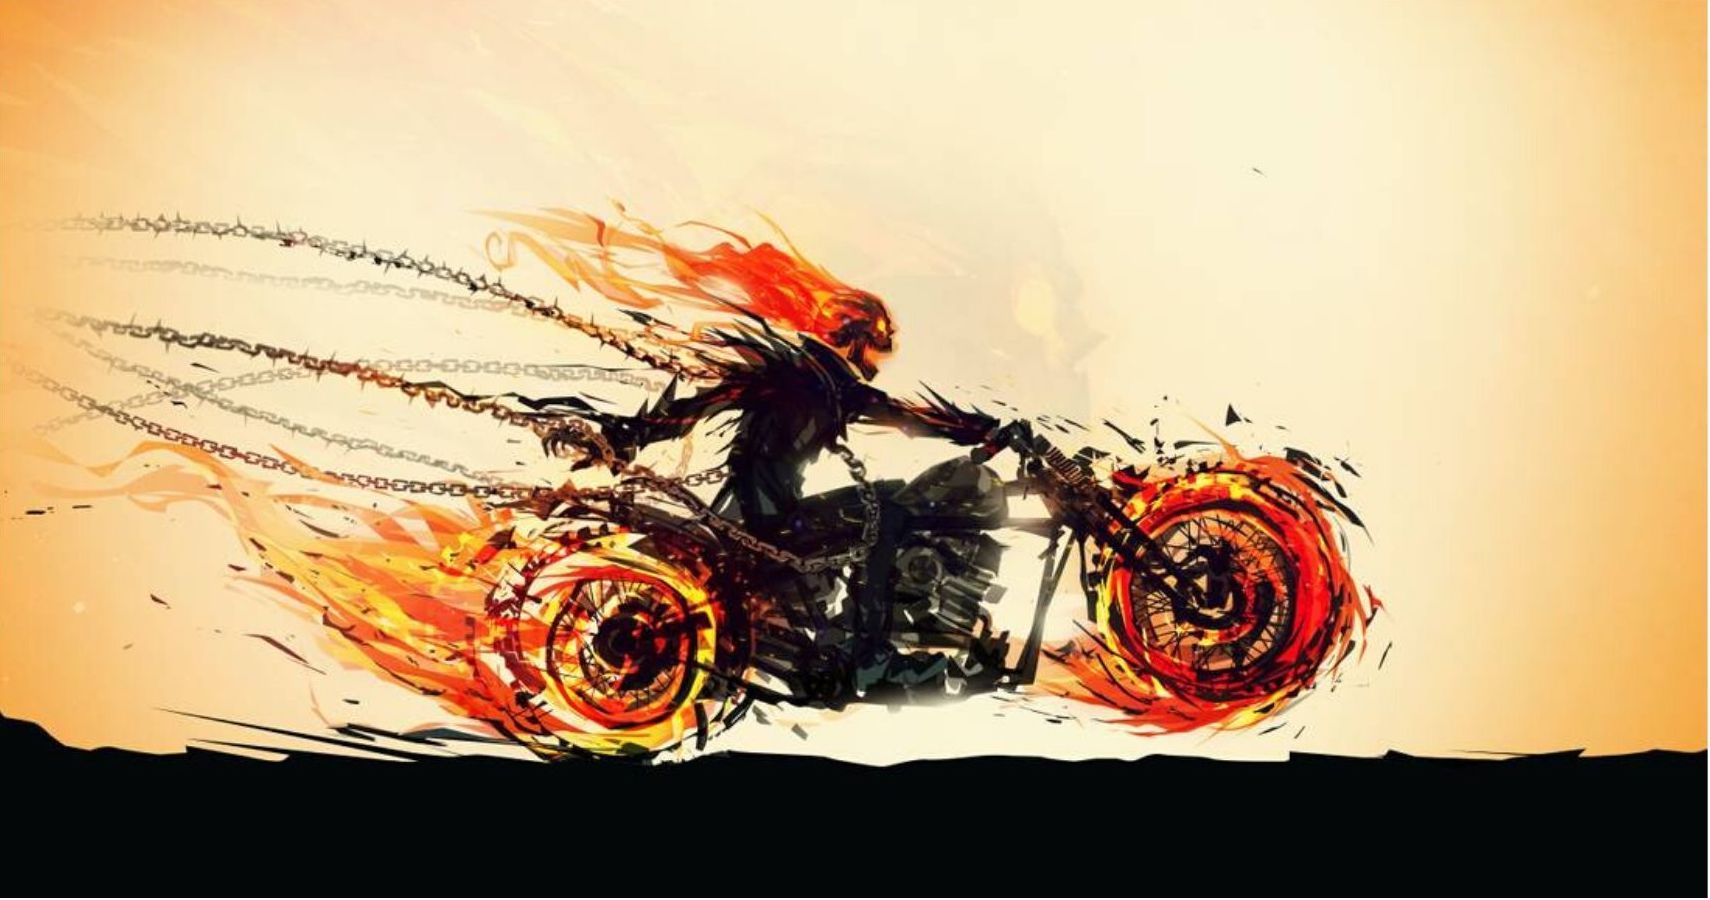 100+] Ghost Rider Wallpapers | Wallpapers.com